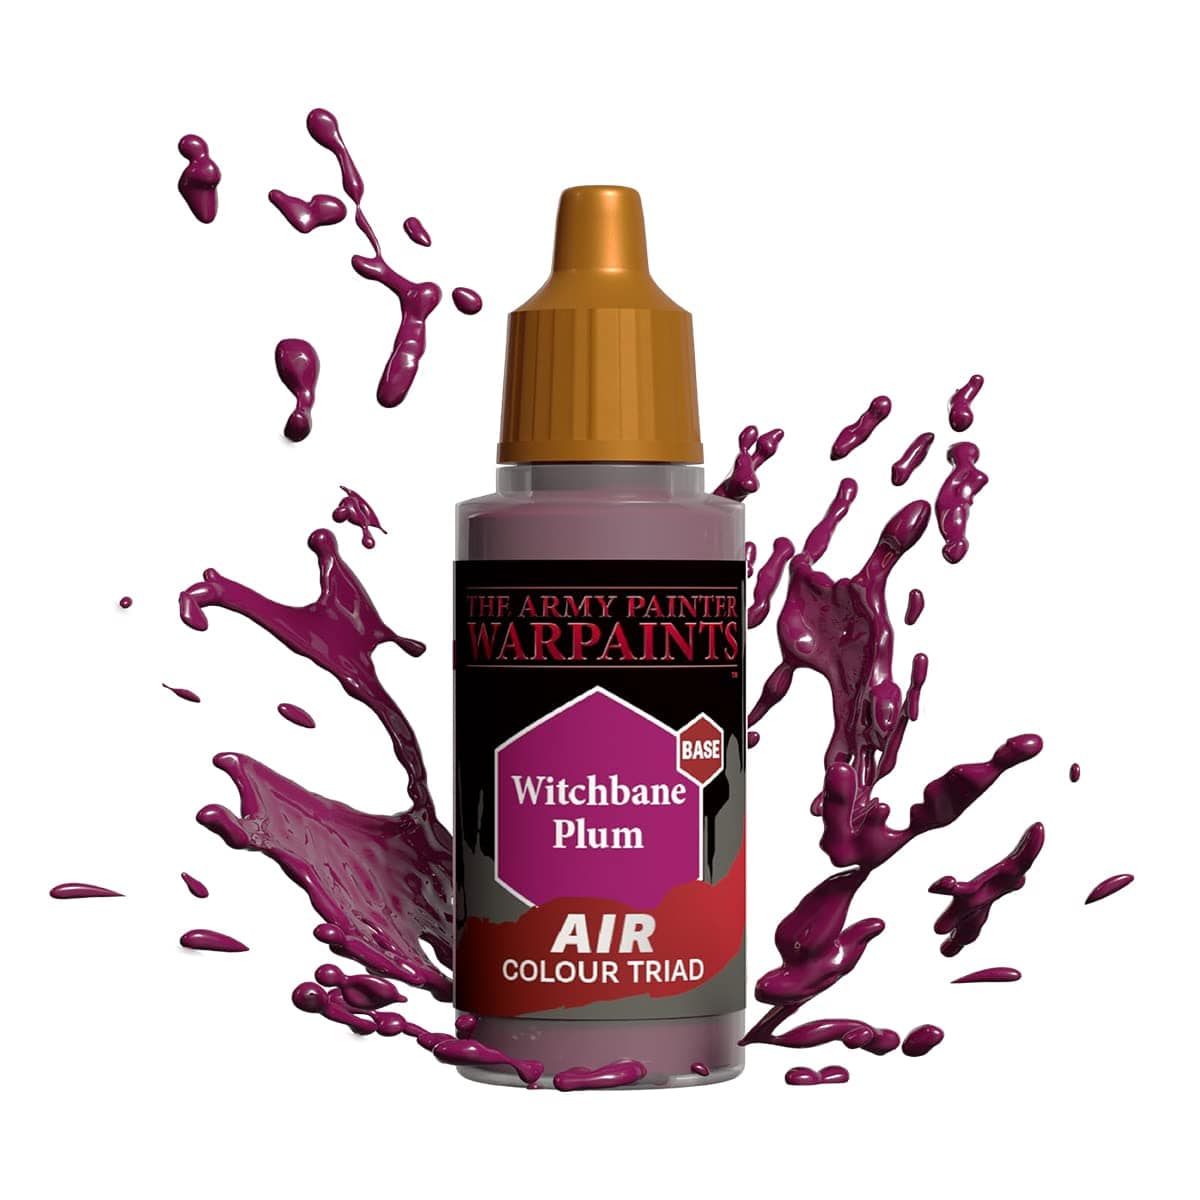 The Army Painter Accessories The Army Painter Warpaints Air: Witchbane Plum 18ml